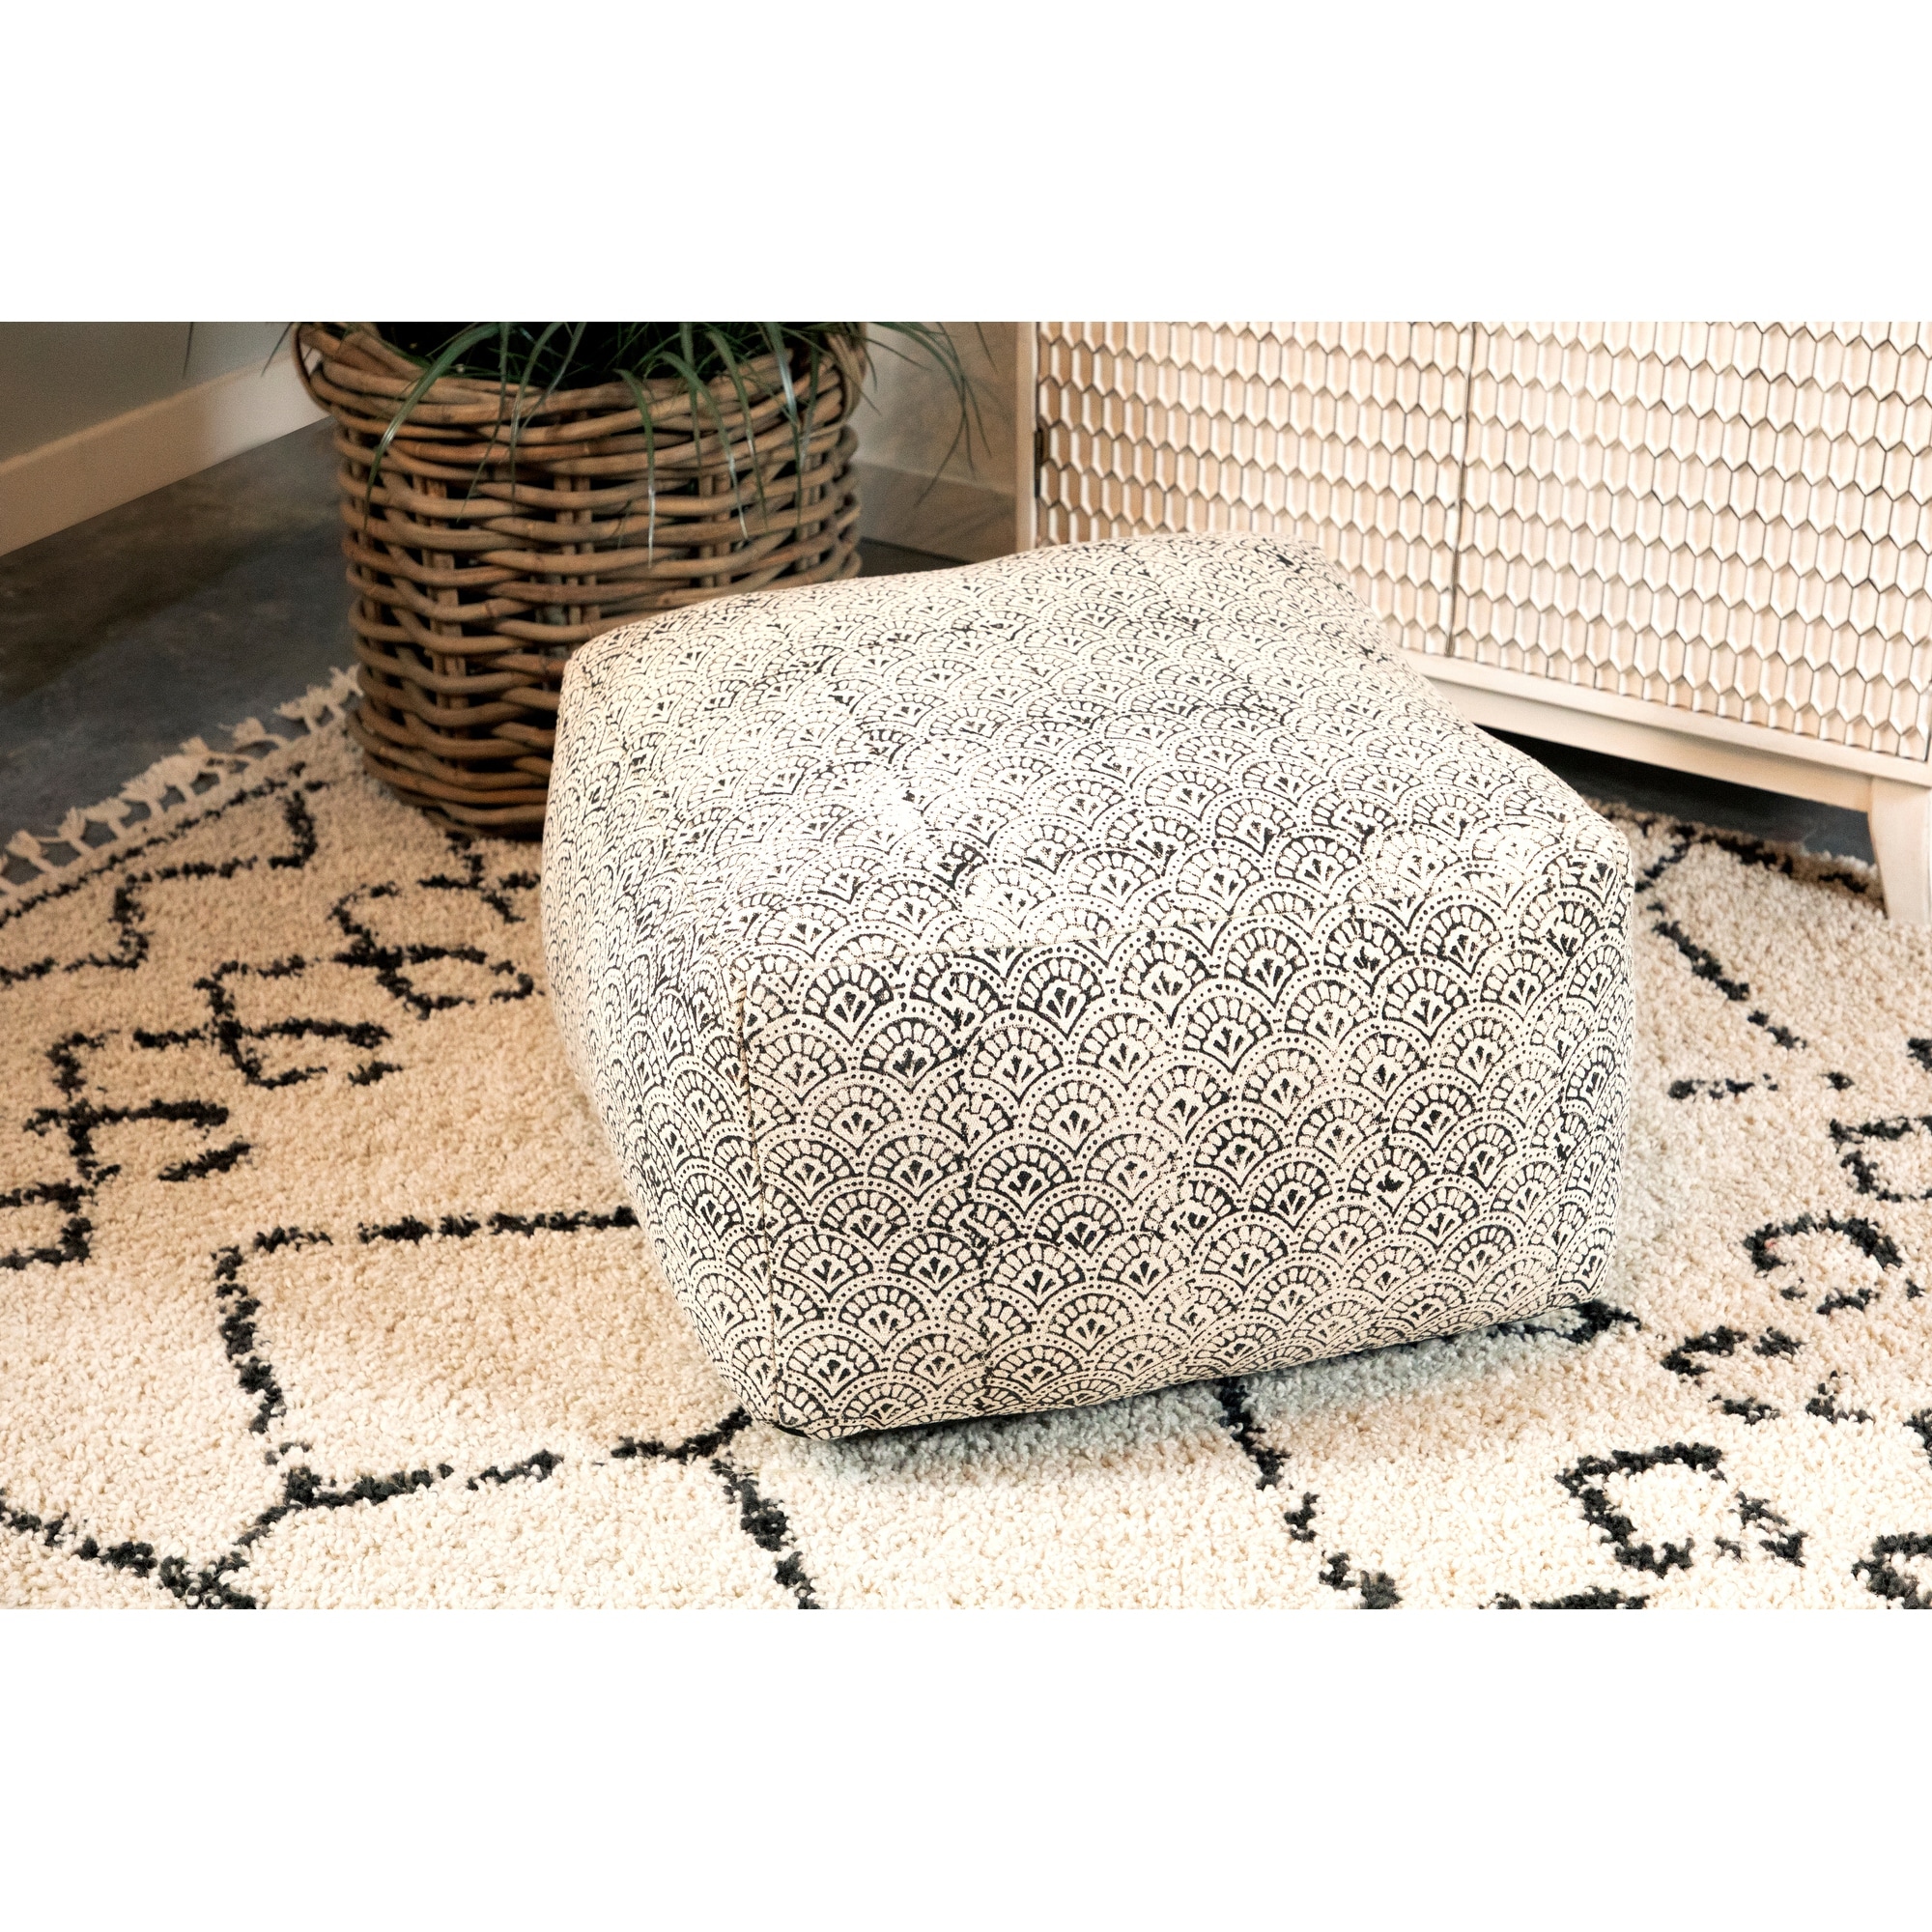 Coaster Furniture Landry Cream and Black Square Upholstered Floor Pouf